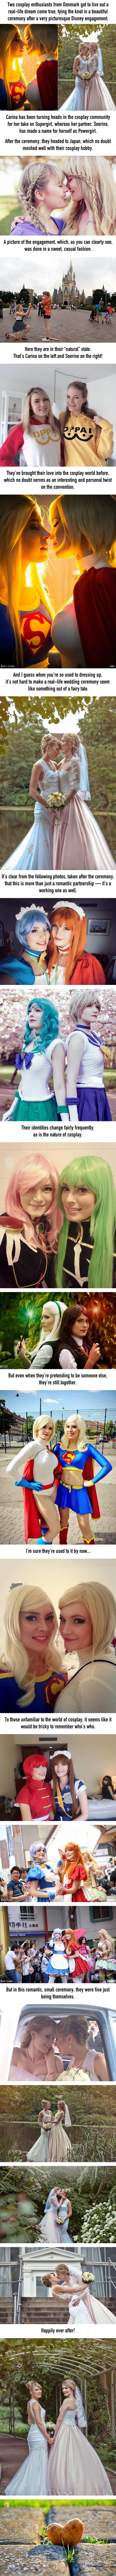 These two female cosplayers got married in a real-life dream ceremony (By Grace Almera)